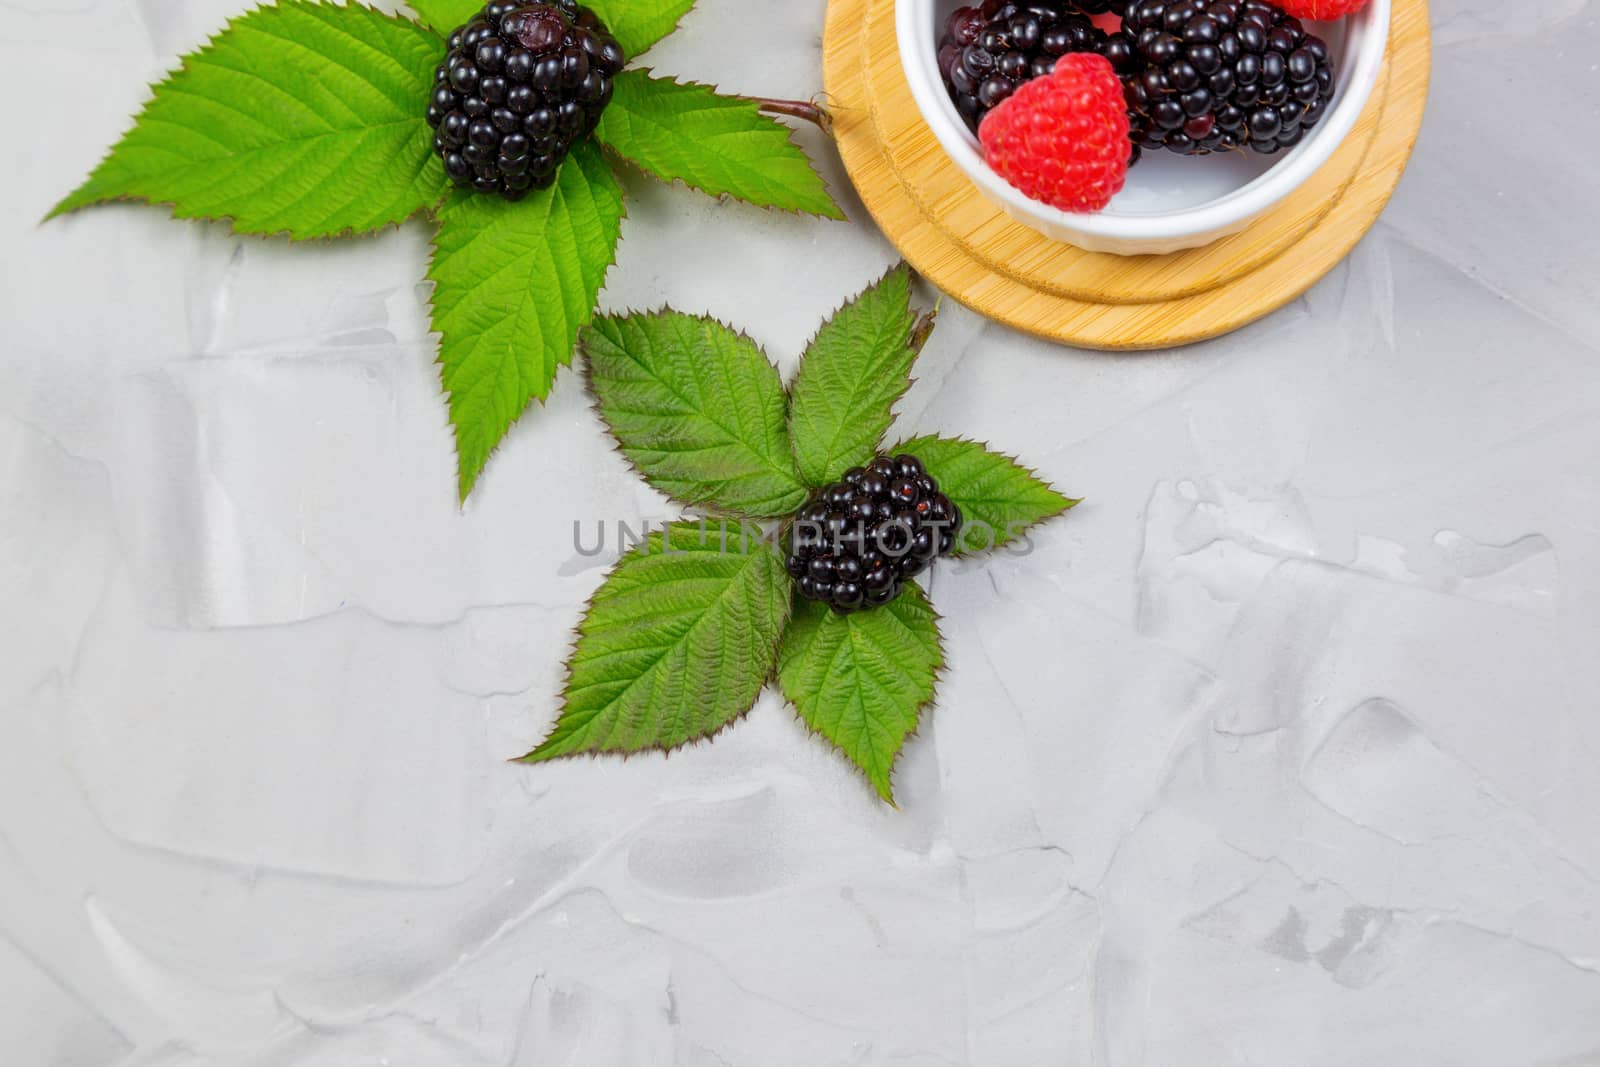 ripe blackberry with leaves on a wooden cutting board by galinasharapova